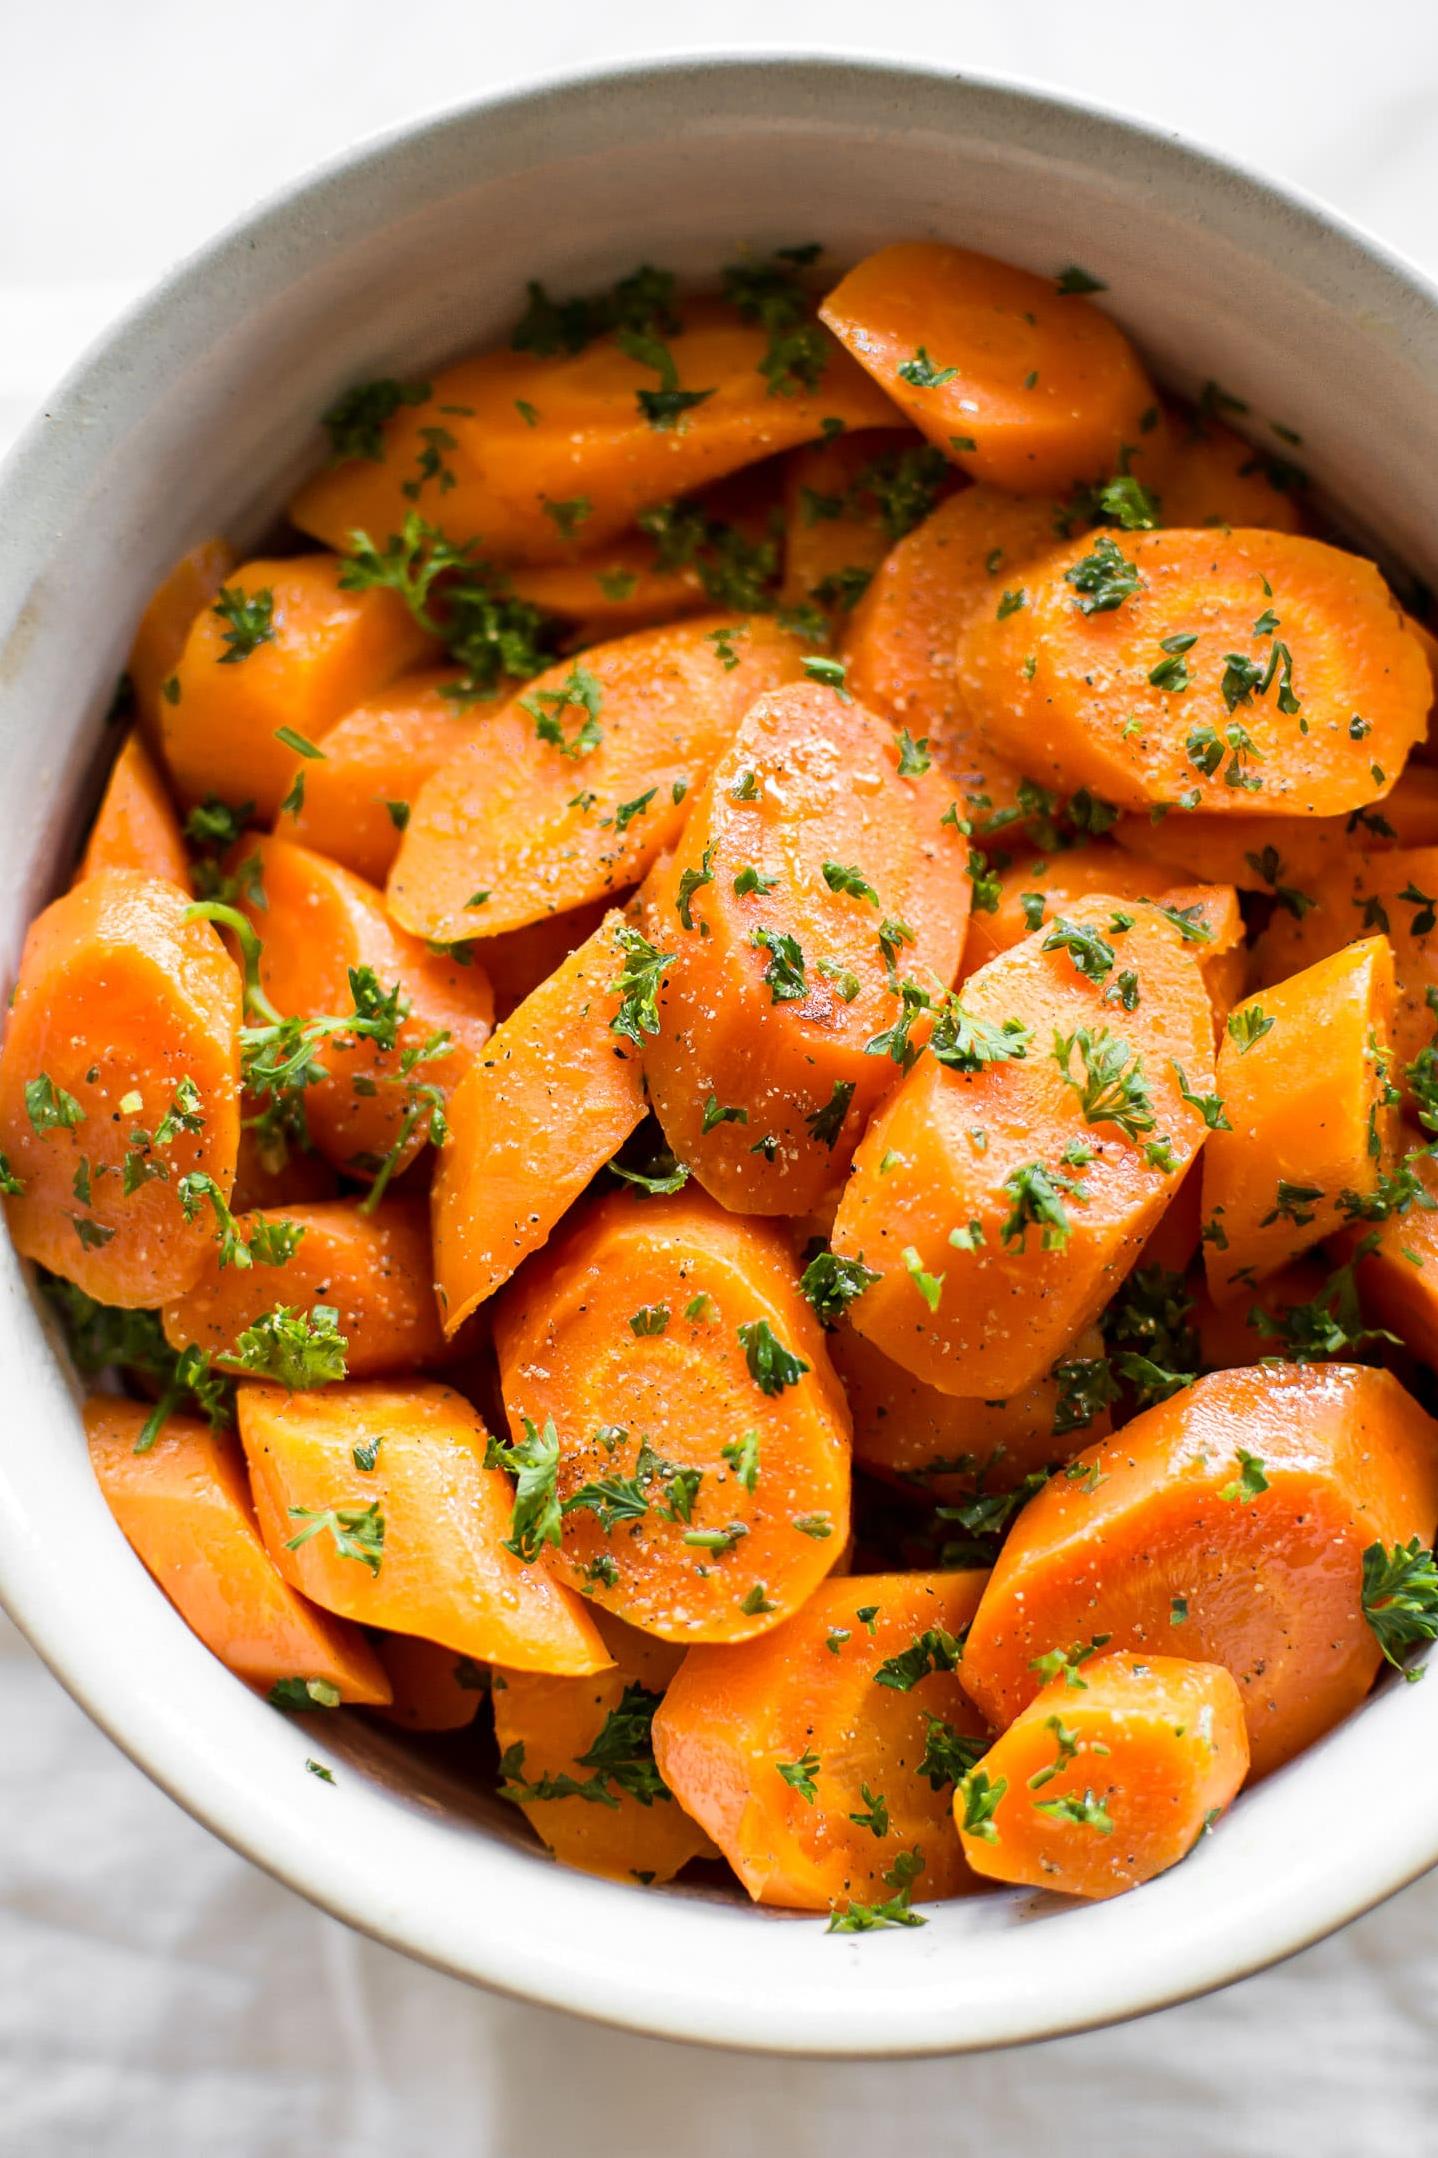  Whether it's for a holiday dinner or a weeknight meal, these carrots are a must-try.